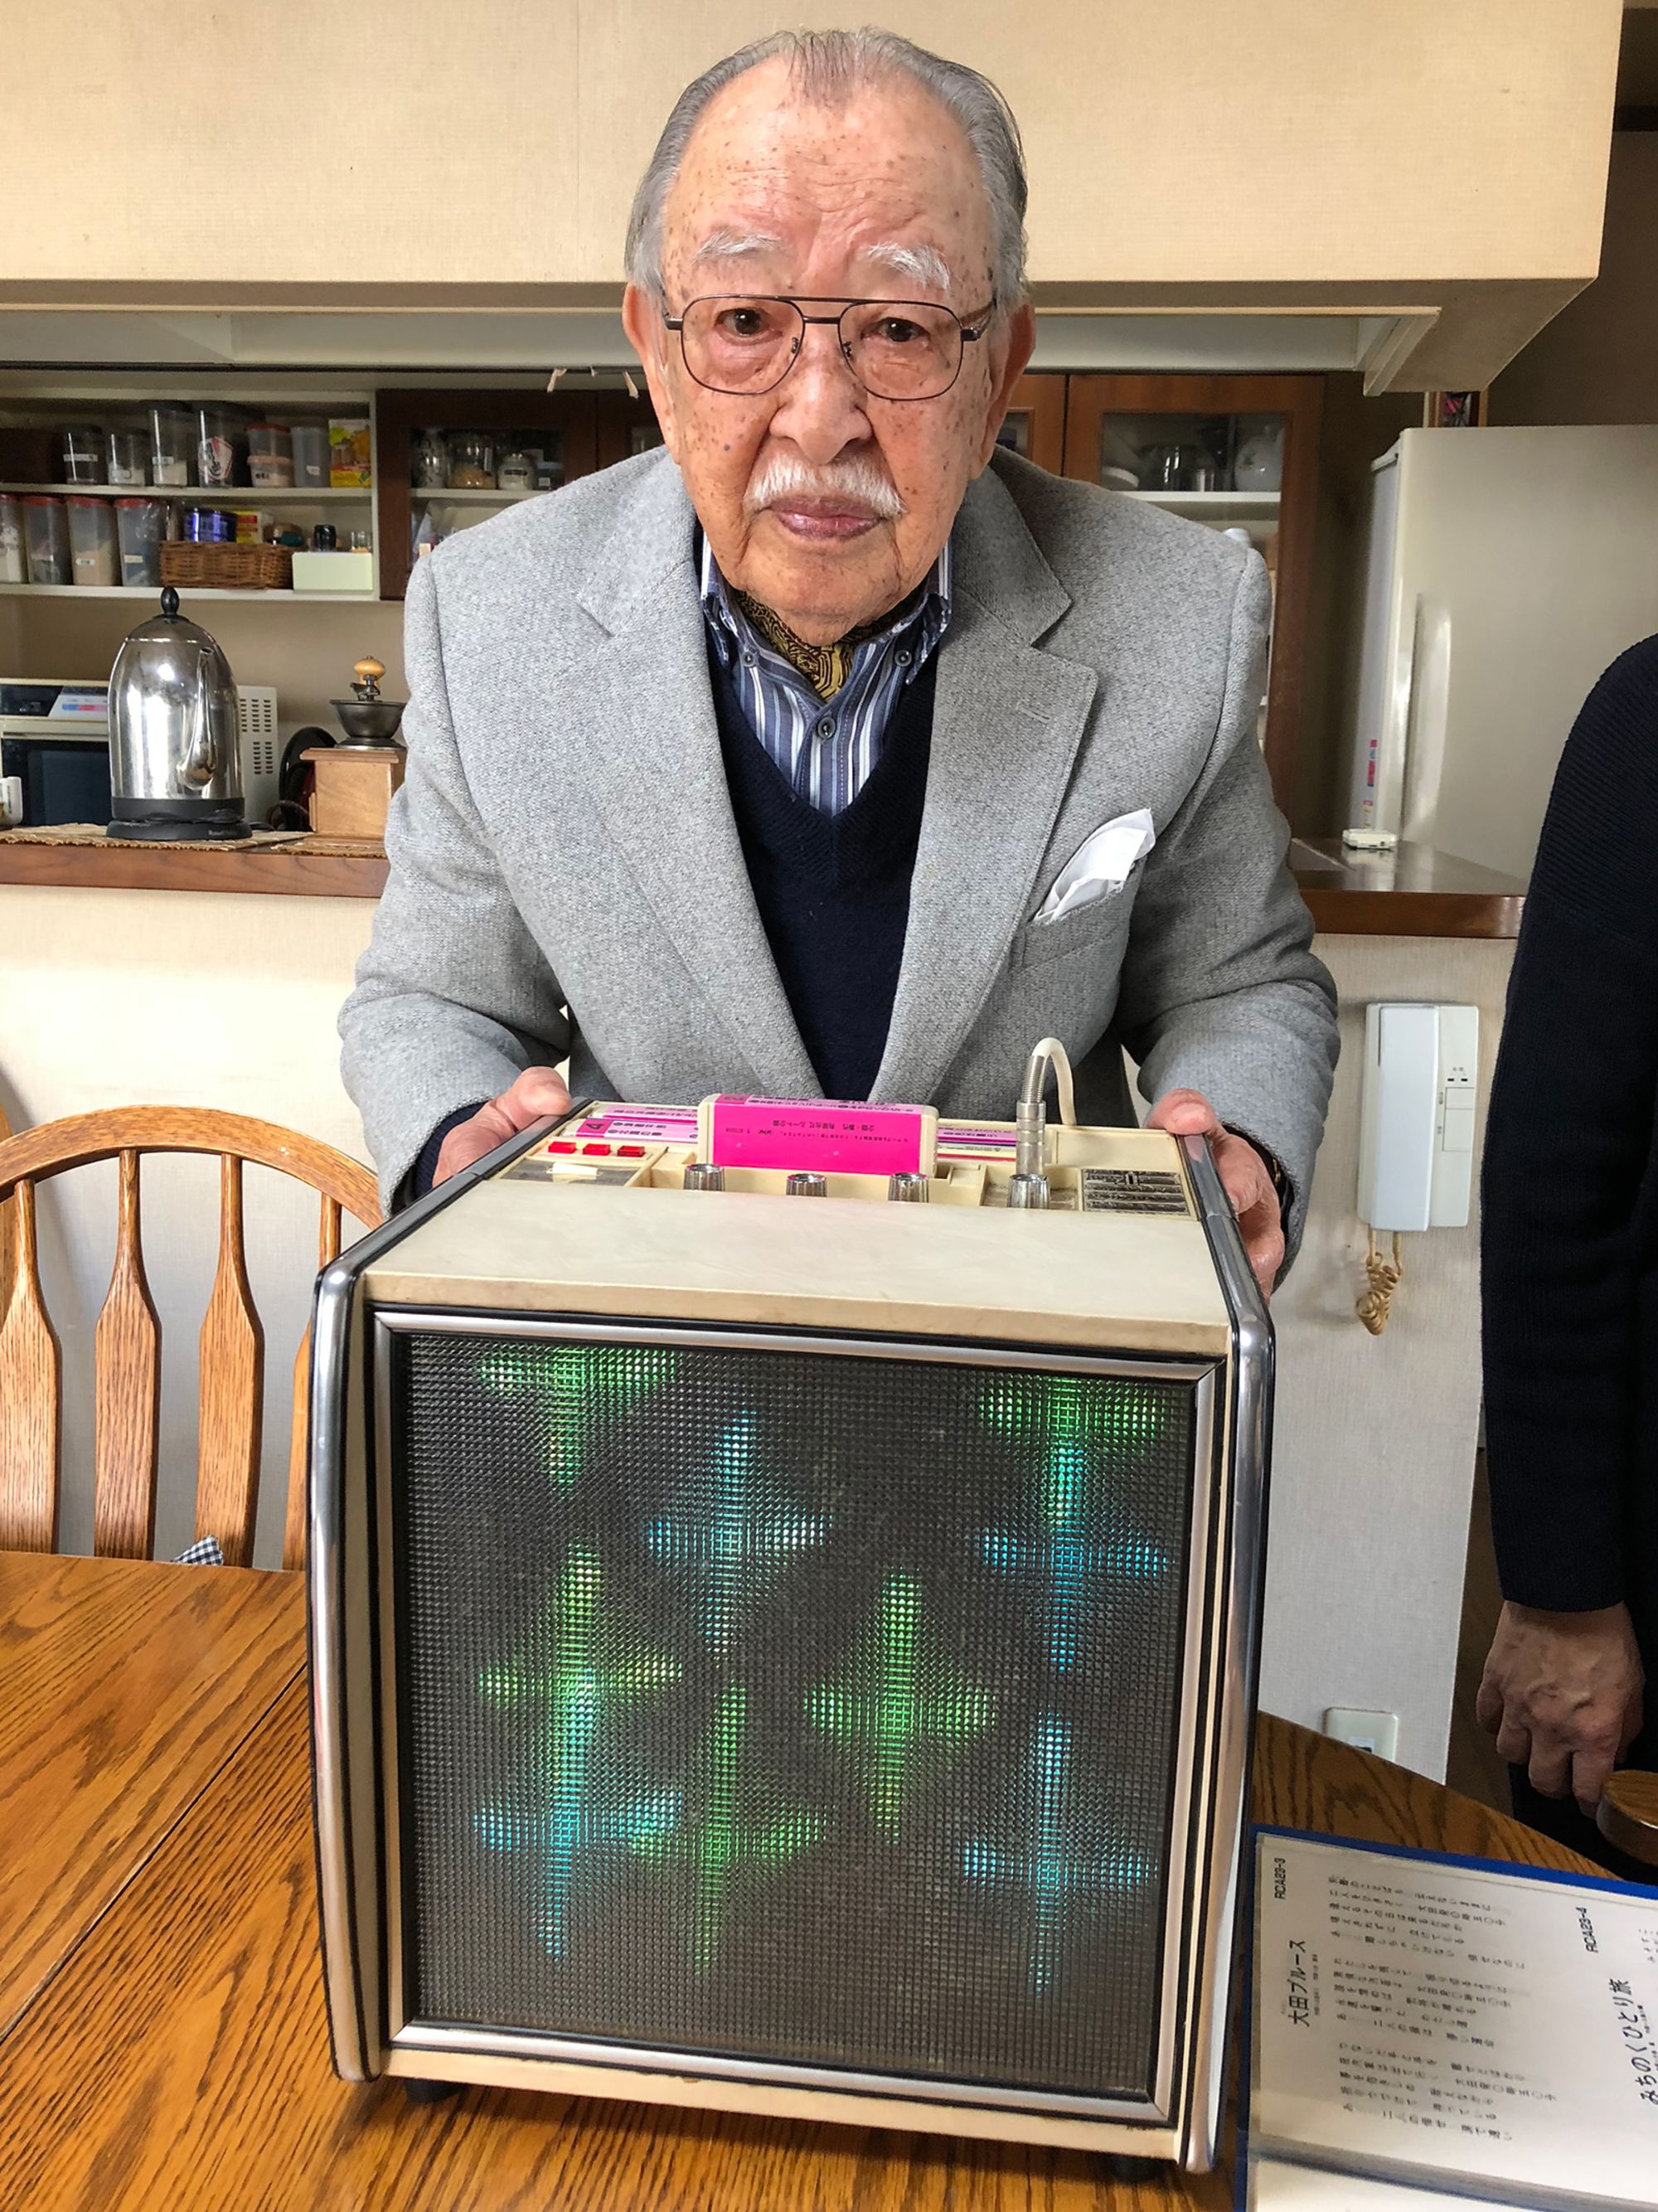 Shigeichi Negishi, inventor of the earliest karaoke machine, poses with his creation for a picture featured in author Matt Alt's book, “Pure Invention: How Japan Made the Modern World."